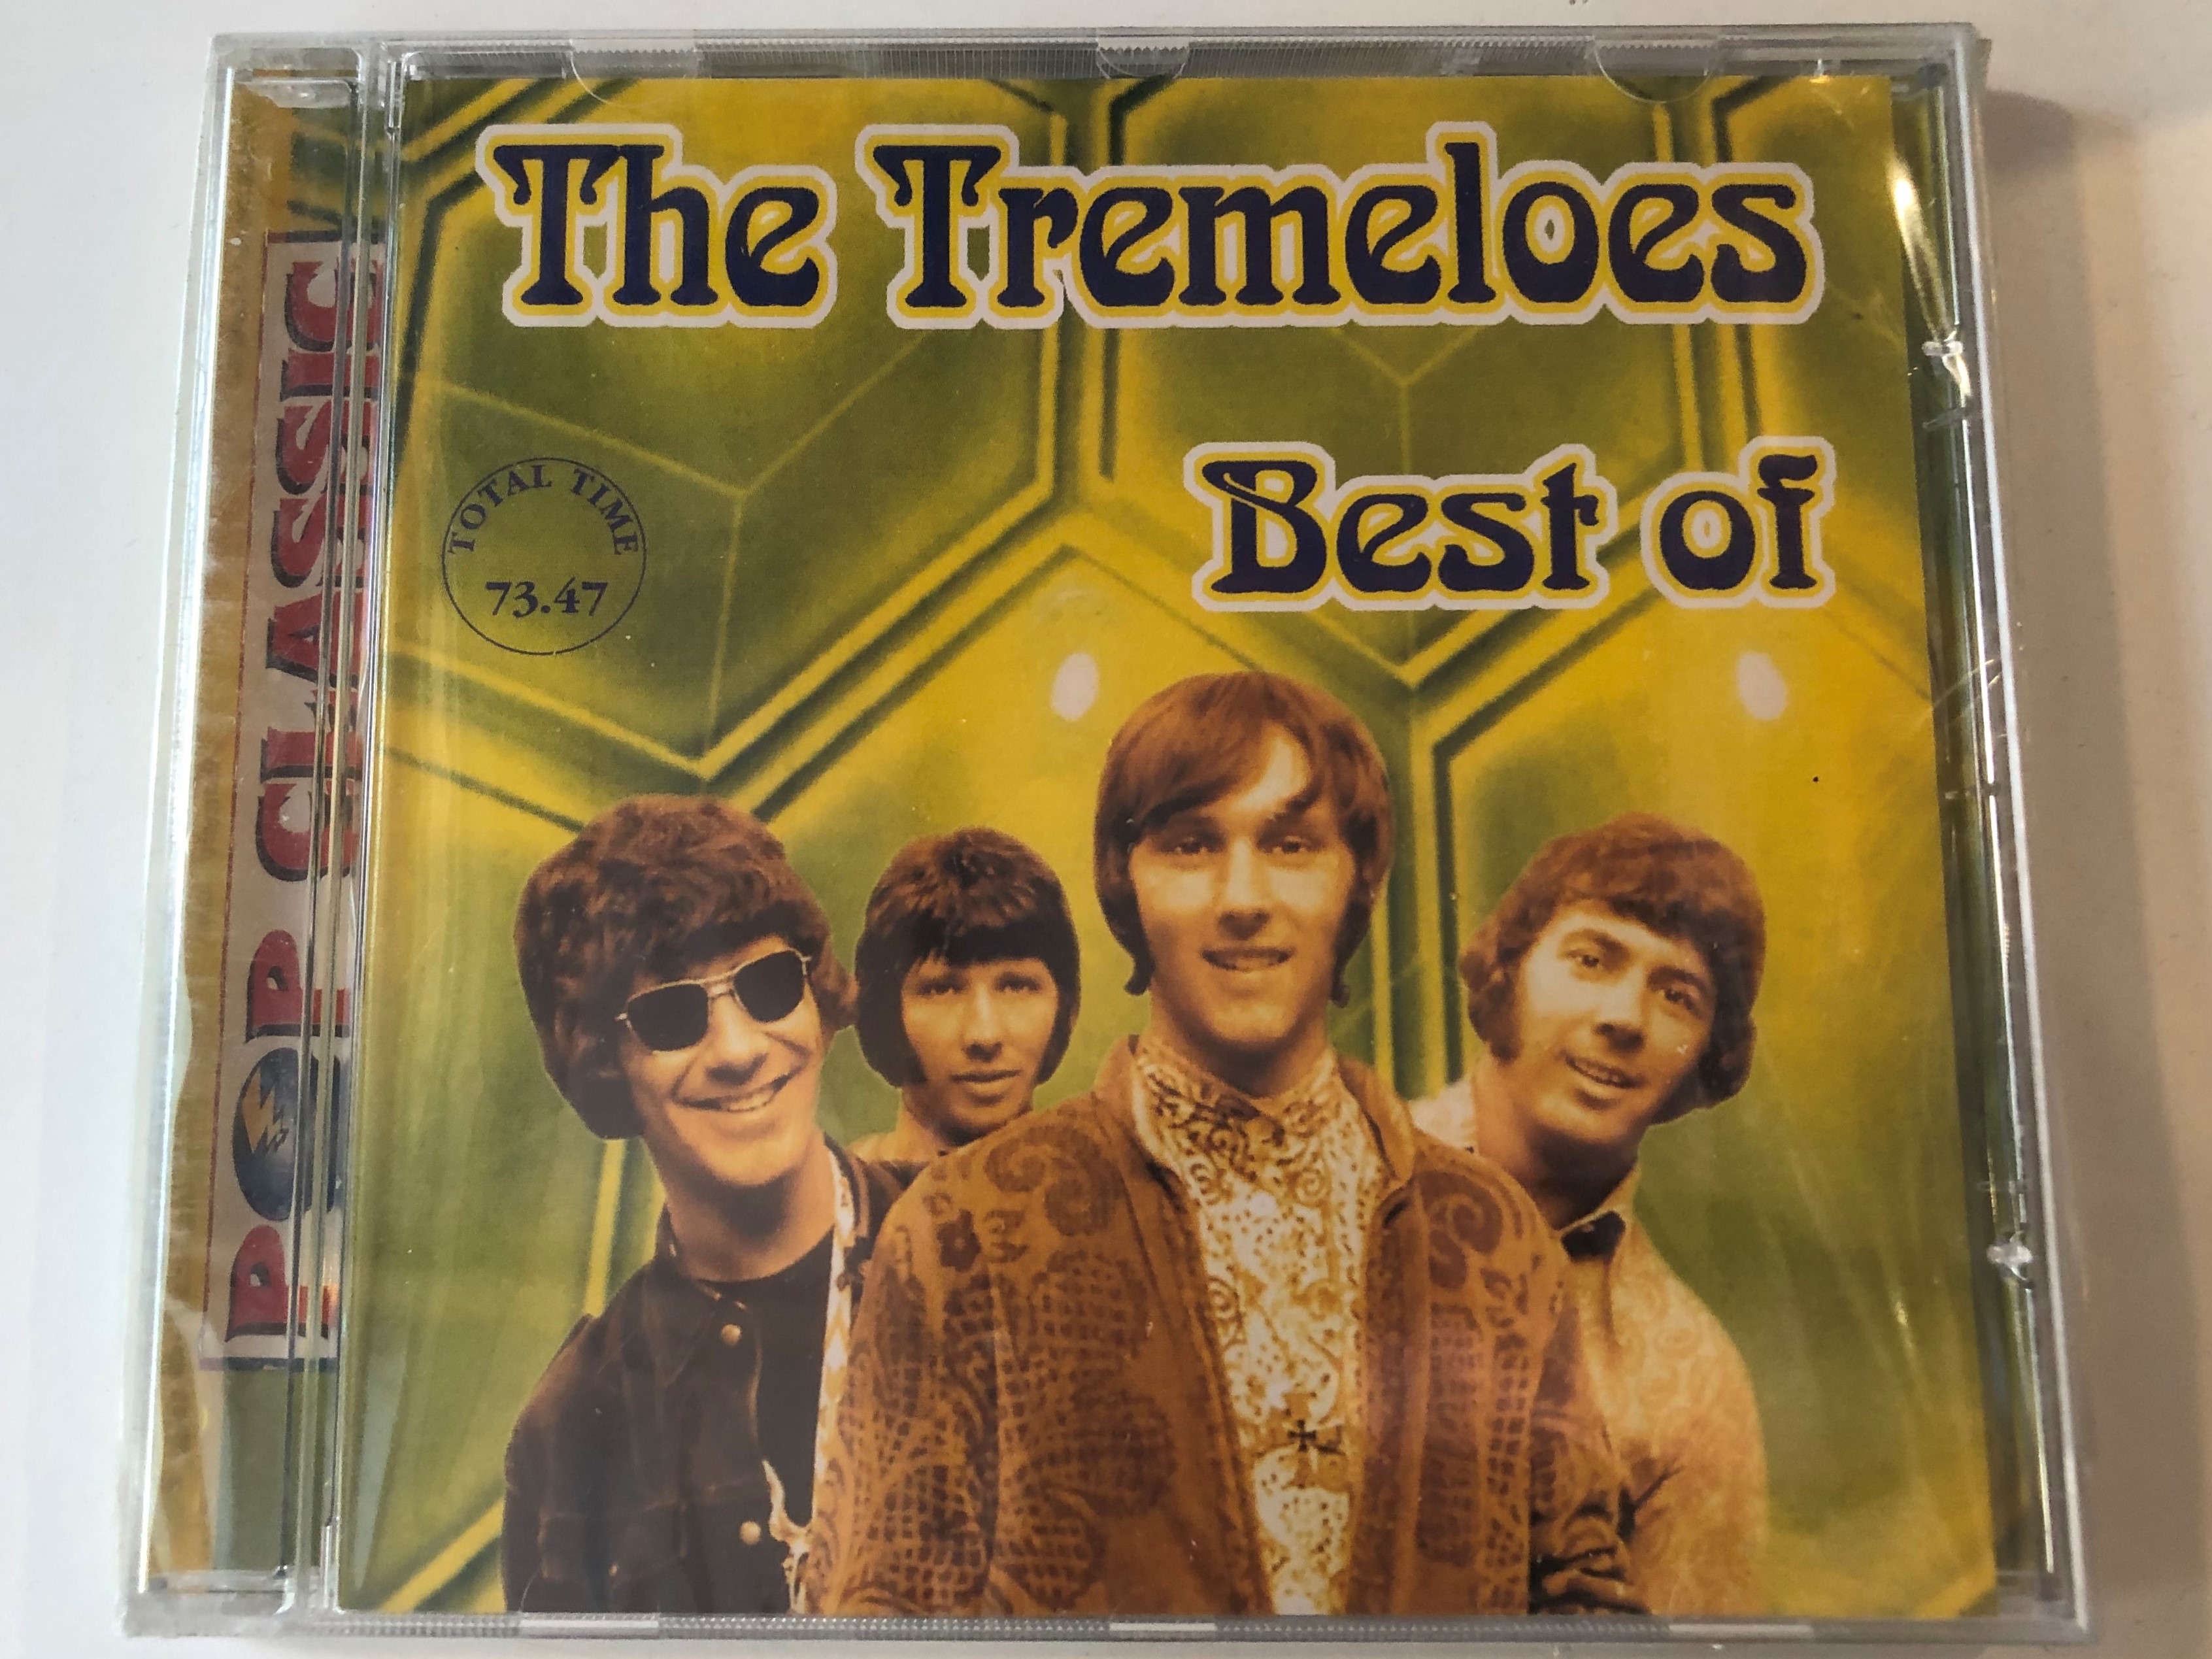 the-tremeloes-best-of-total-time-73.47-pop-classic-euroton-audio-cd-5998490700812-1-.jpg